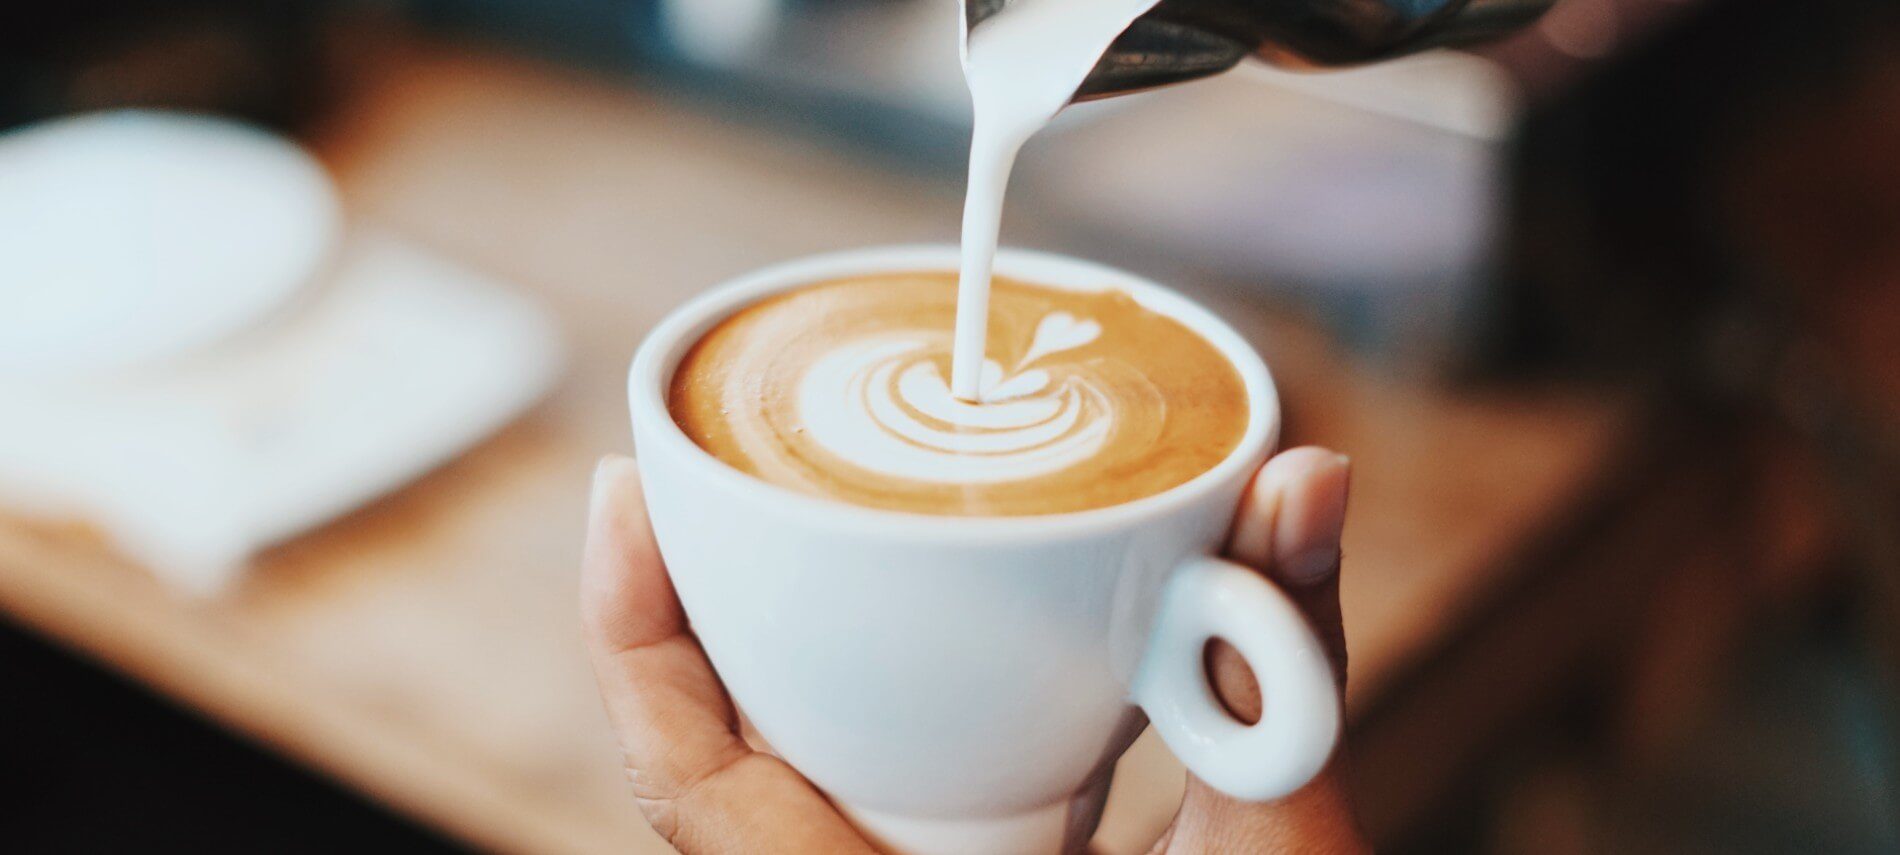 White milk being poured into a mug full of cappuccino coffee